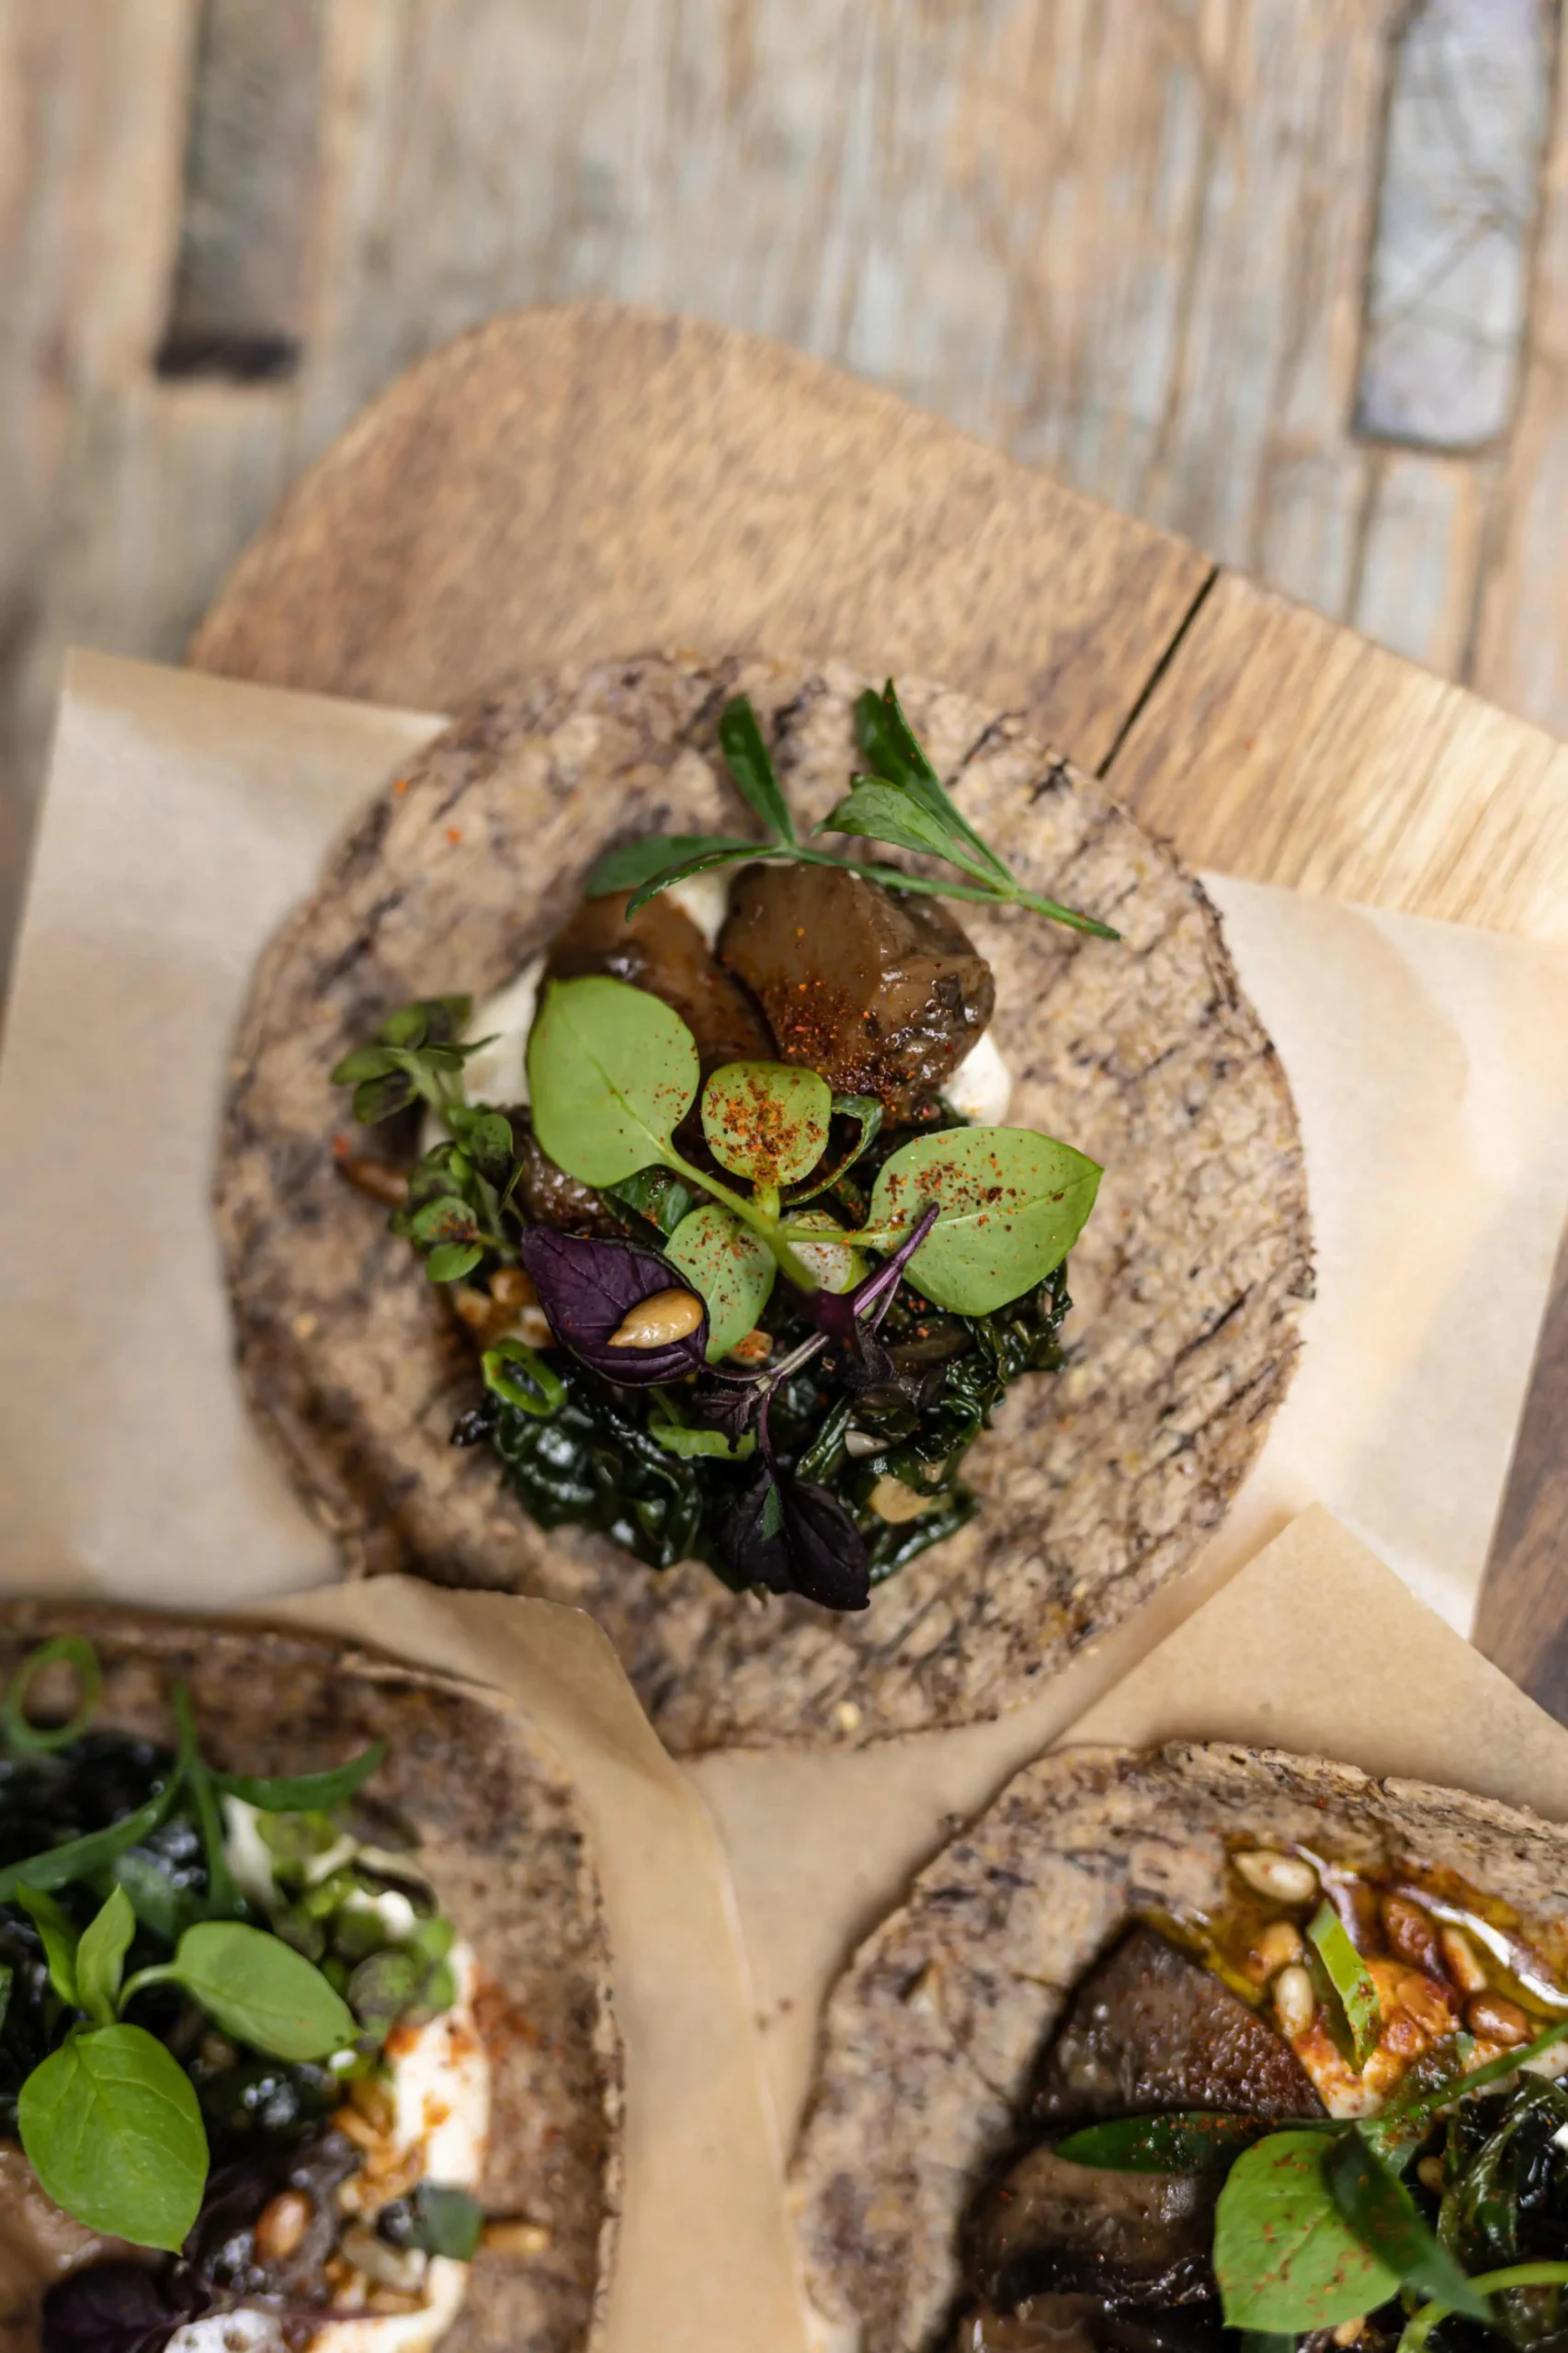 Sustainable dining at HOY Hotel Paris with a focus on organic food, showcasing buckwheat galettes topped with fresh greens, edible flowers, and a colorful sprinkle of spices.